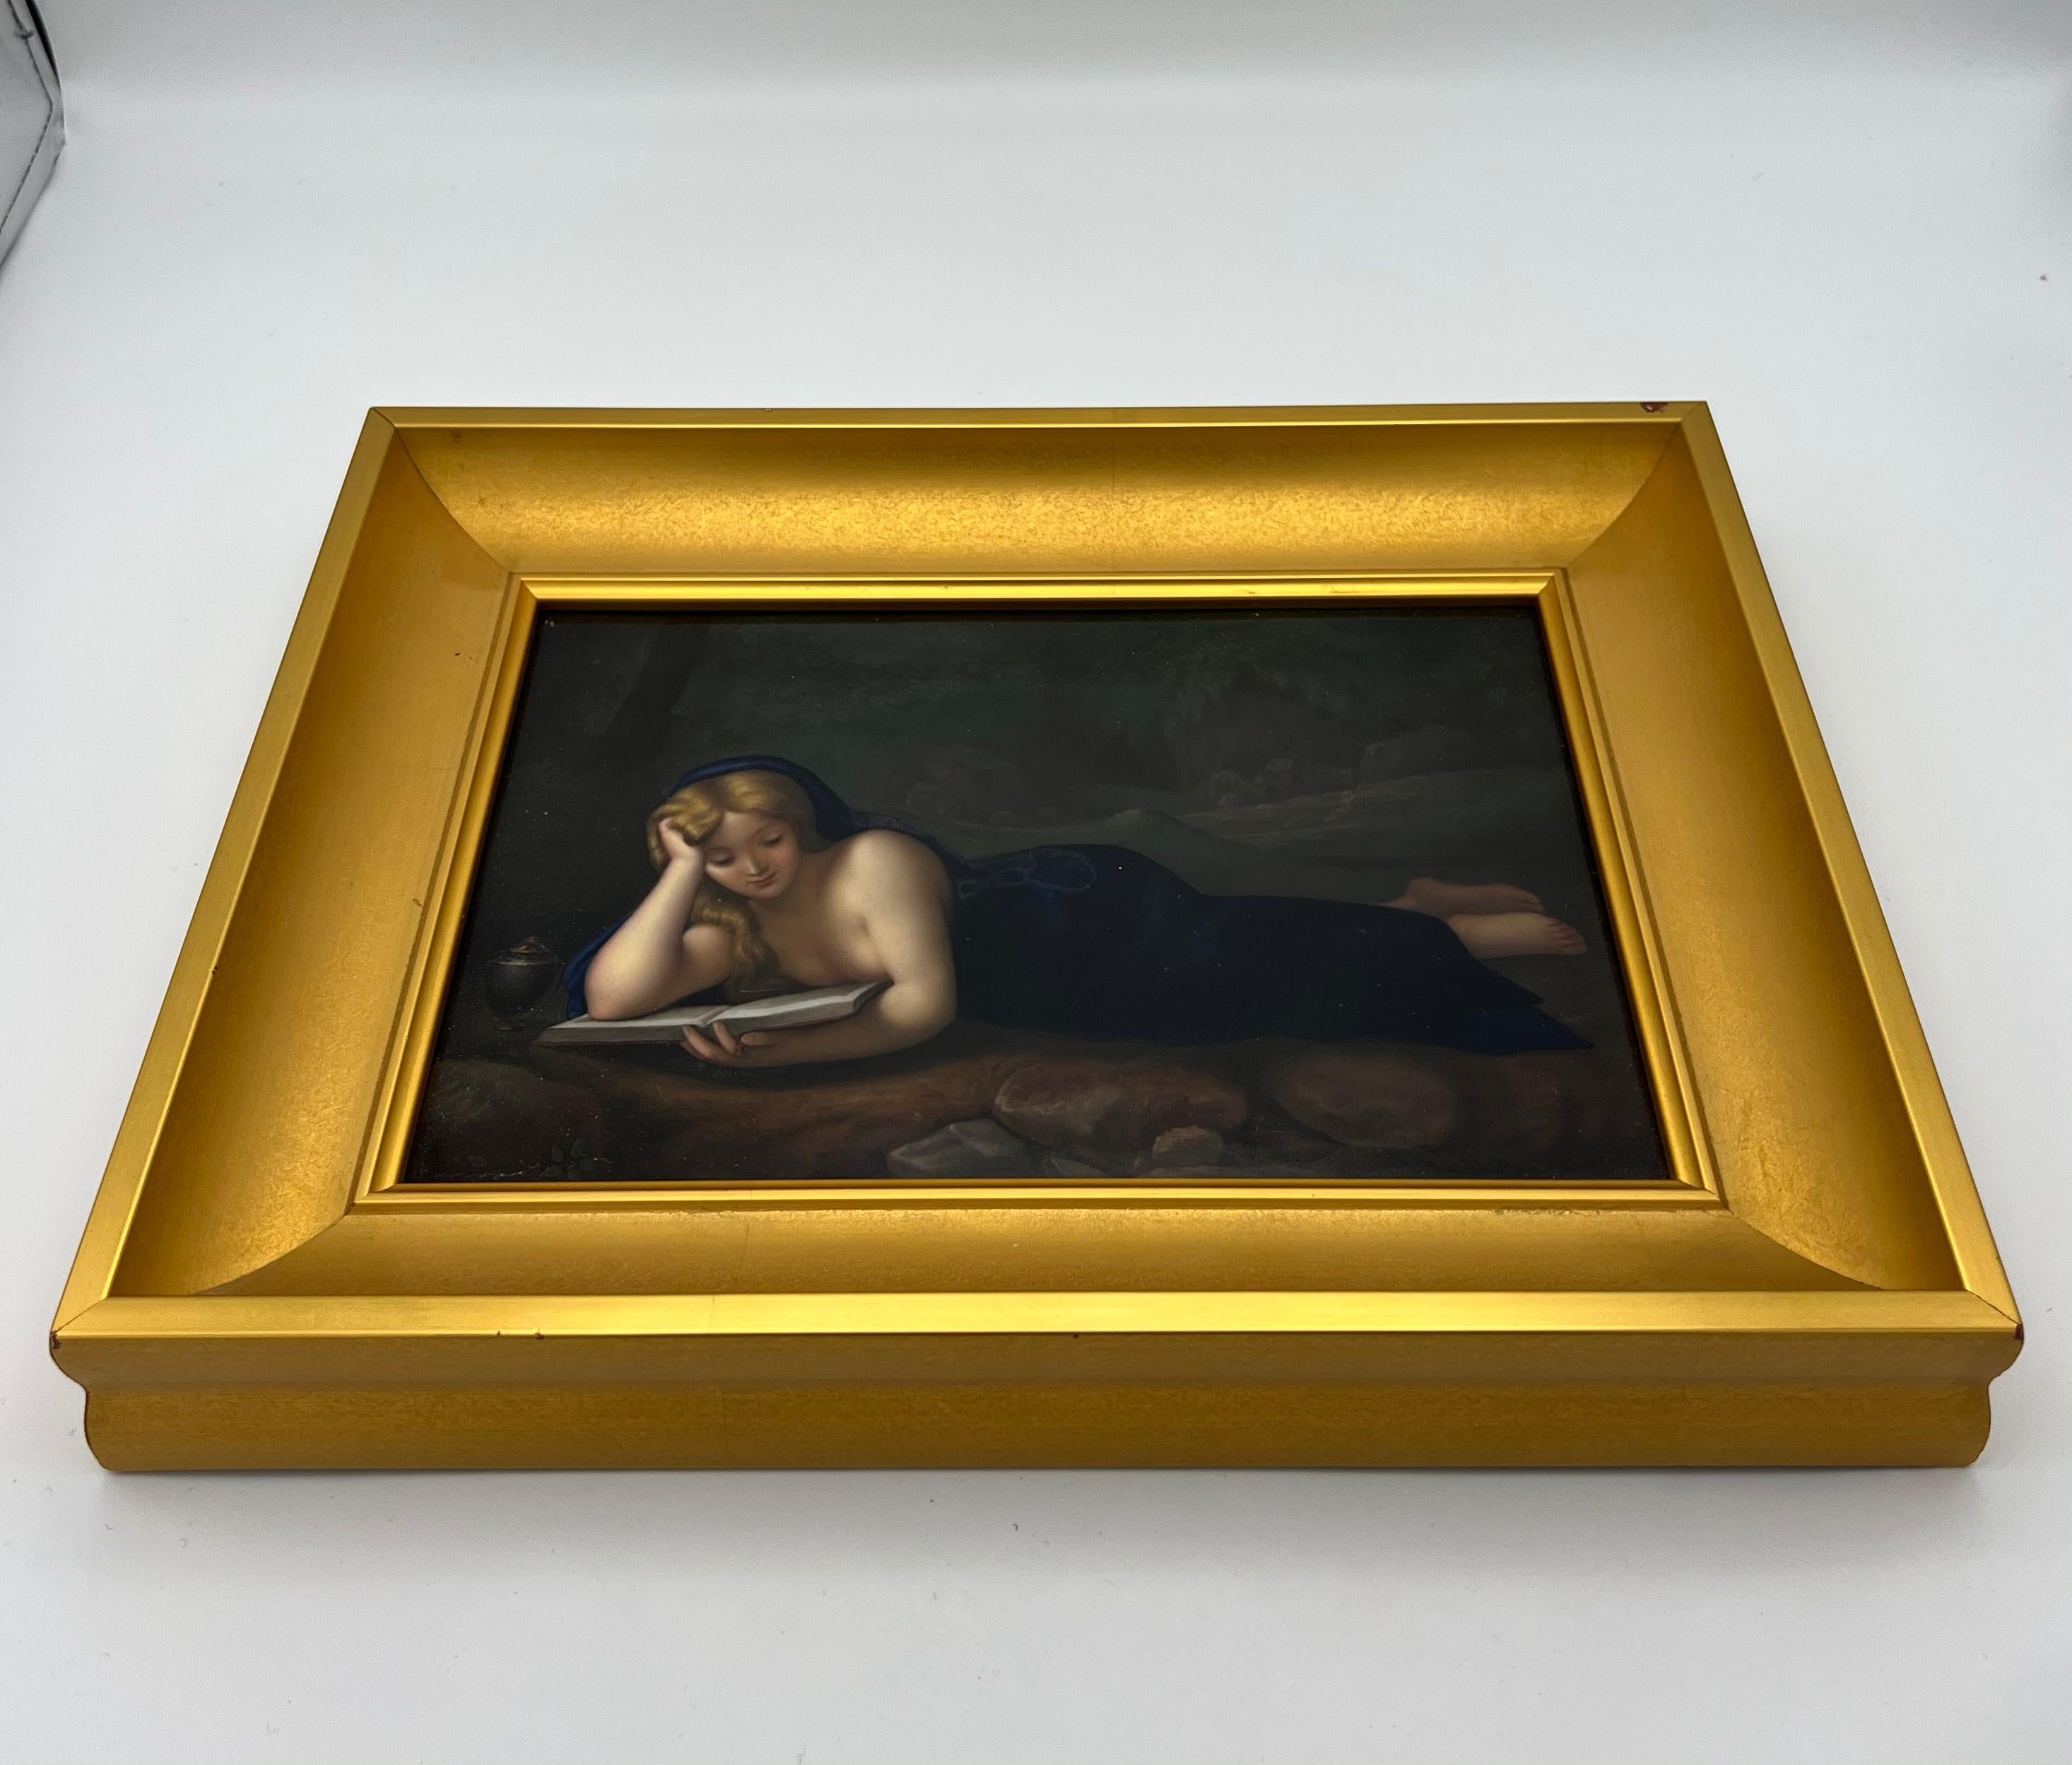 The art work features a hand painted reclining woman reading a book on porcelain plaque with gold leaf frame.
Made in Germany.
Signed by K.P.M. (Konigliche Porzellan Manufaktur).